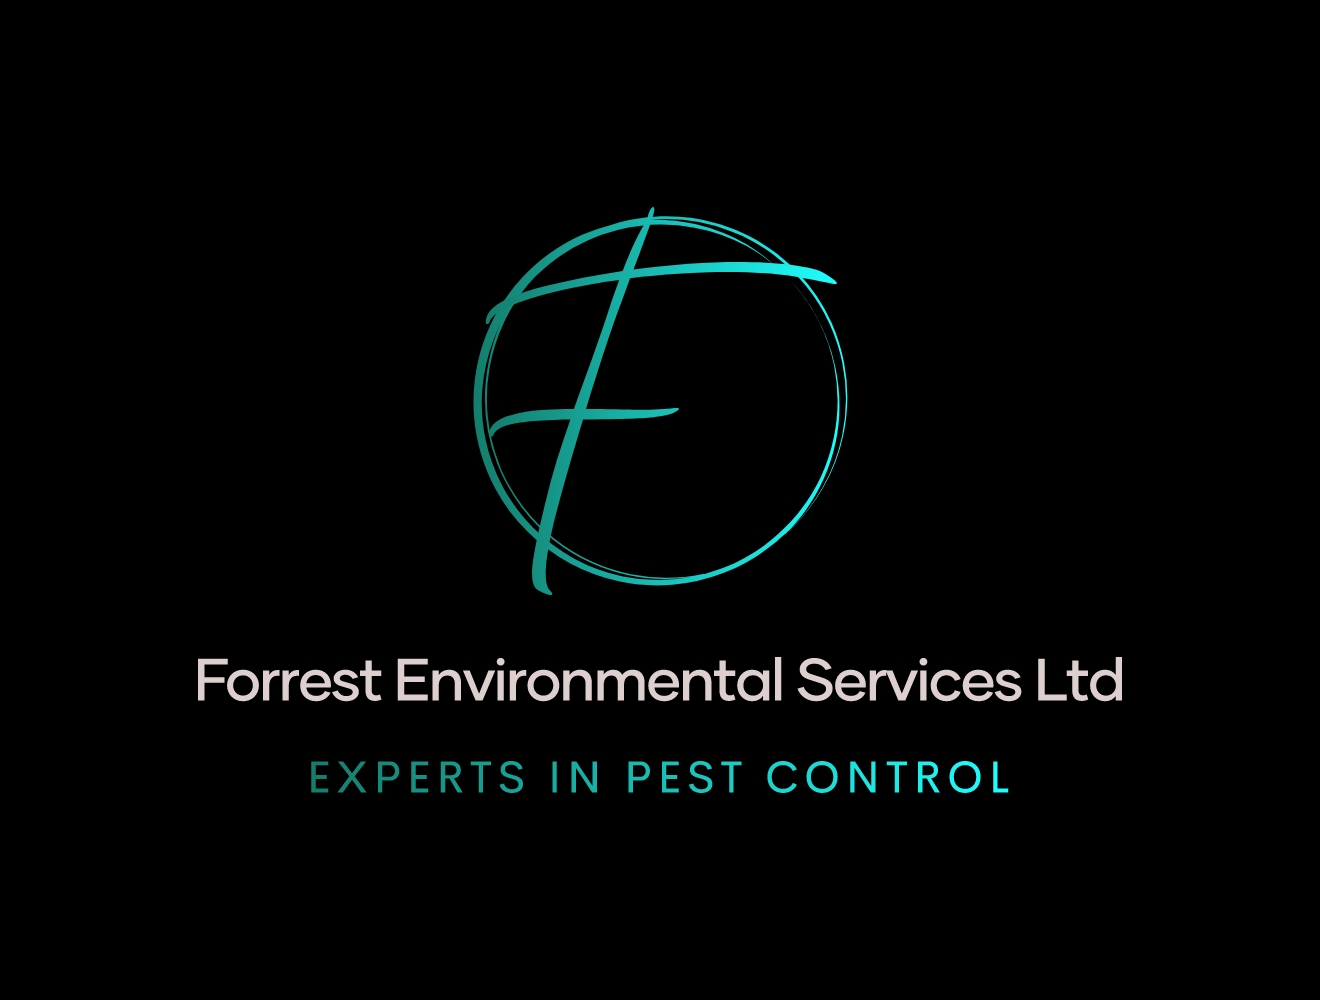 Forrest Environmental Services